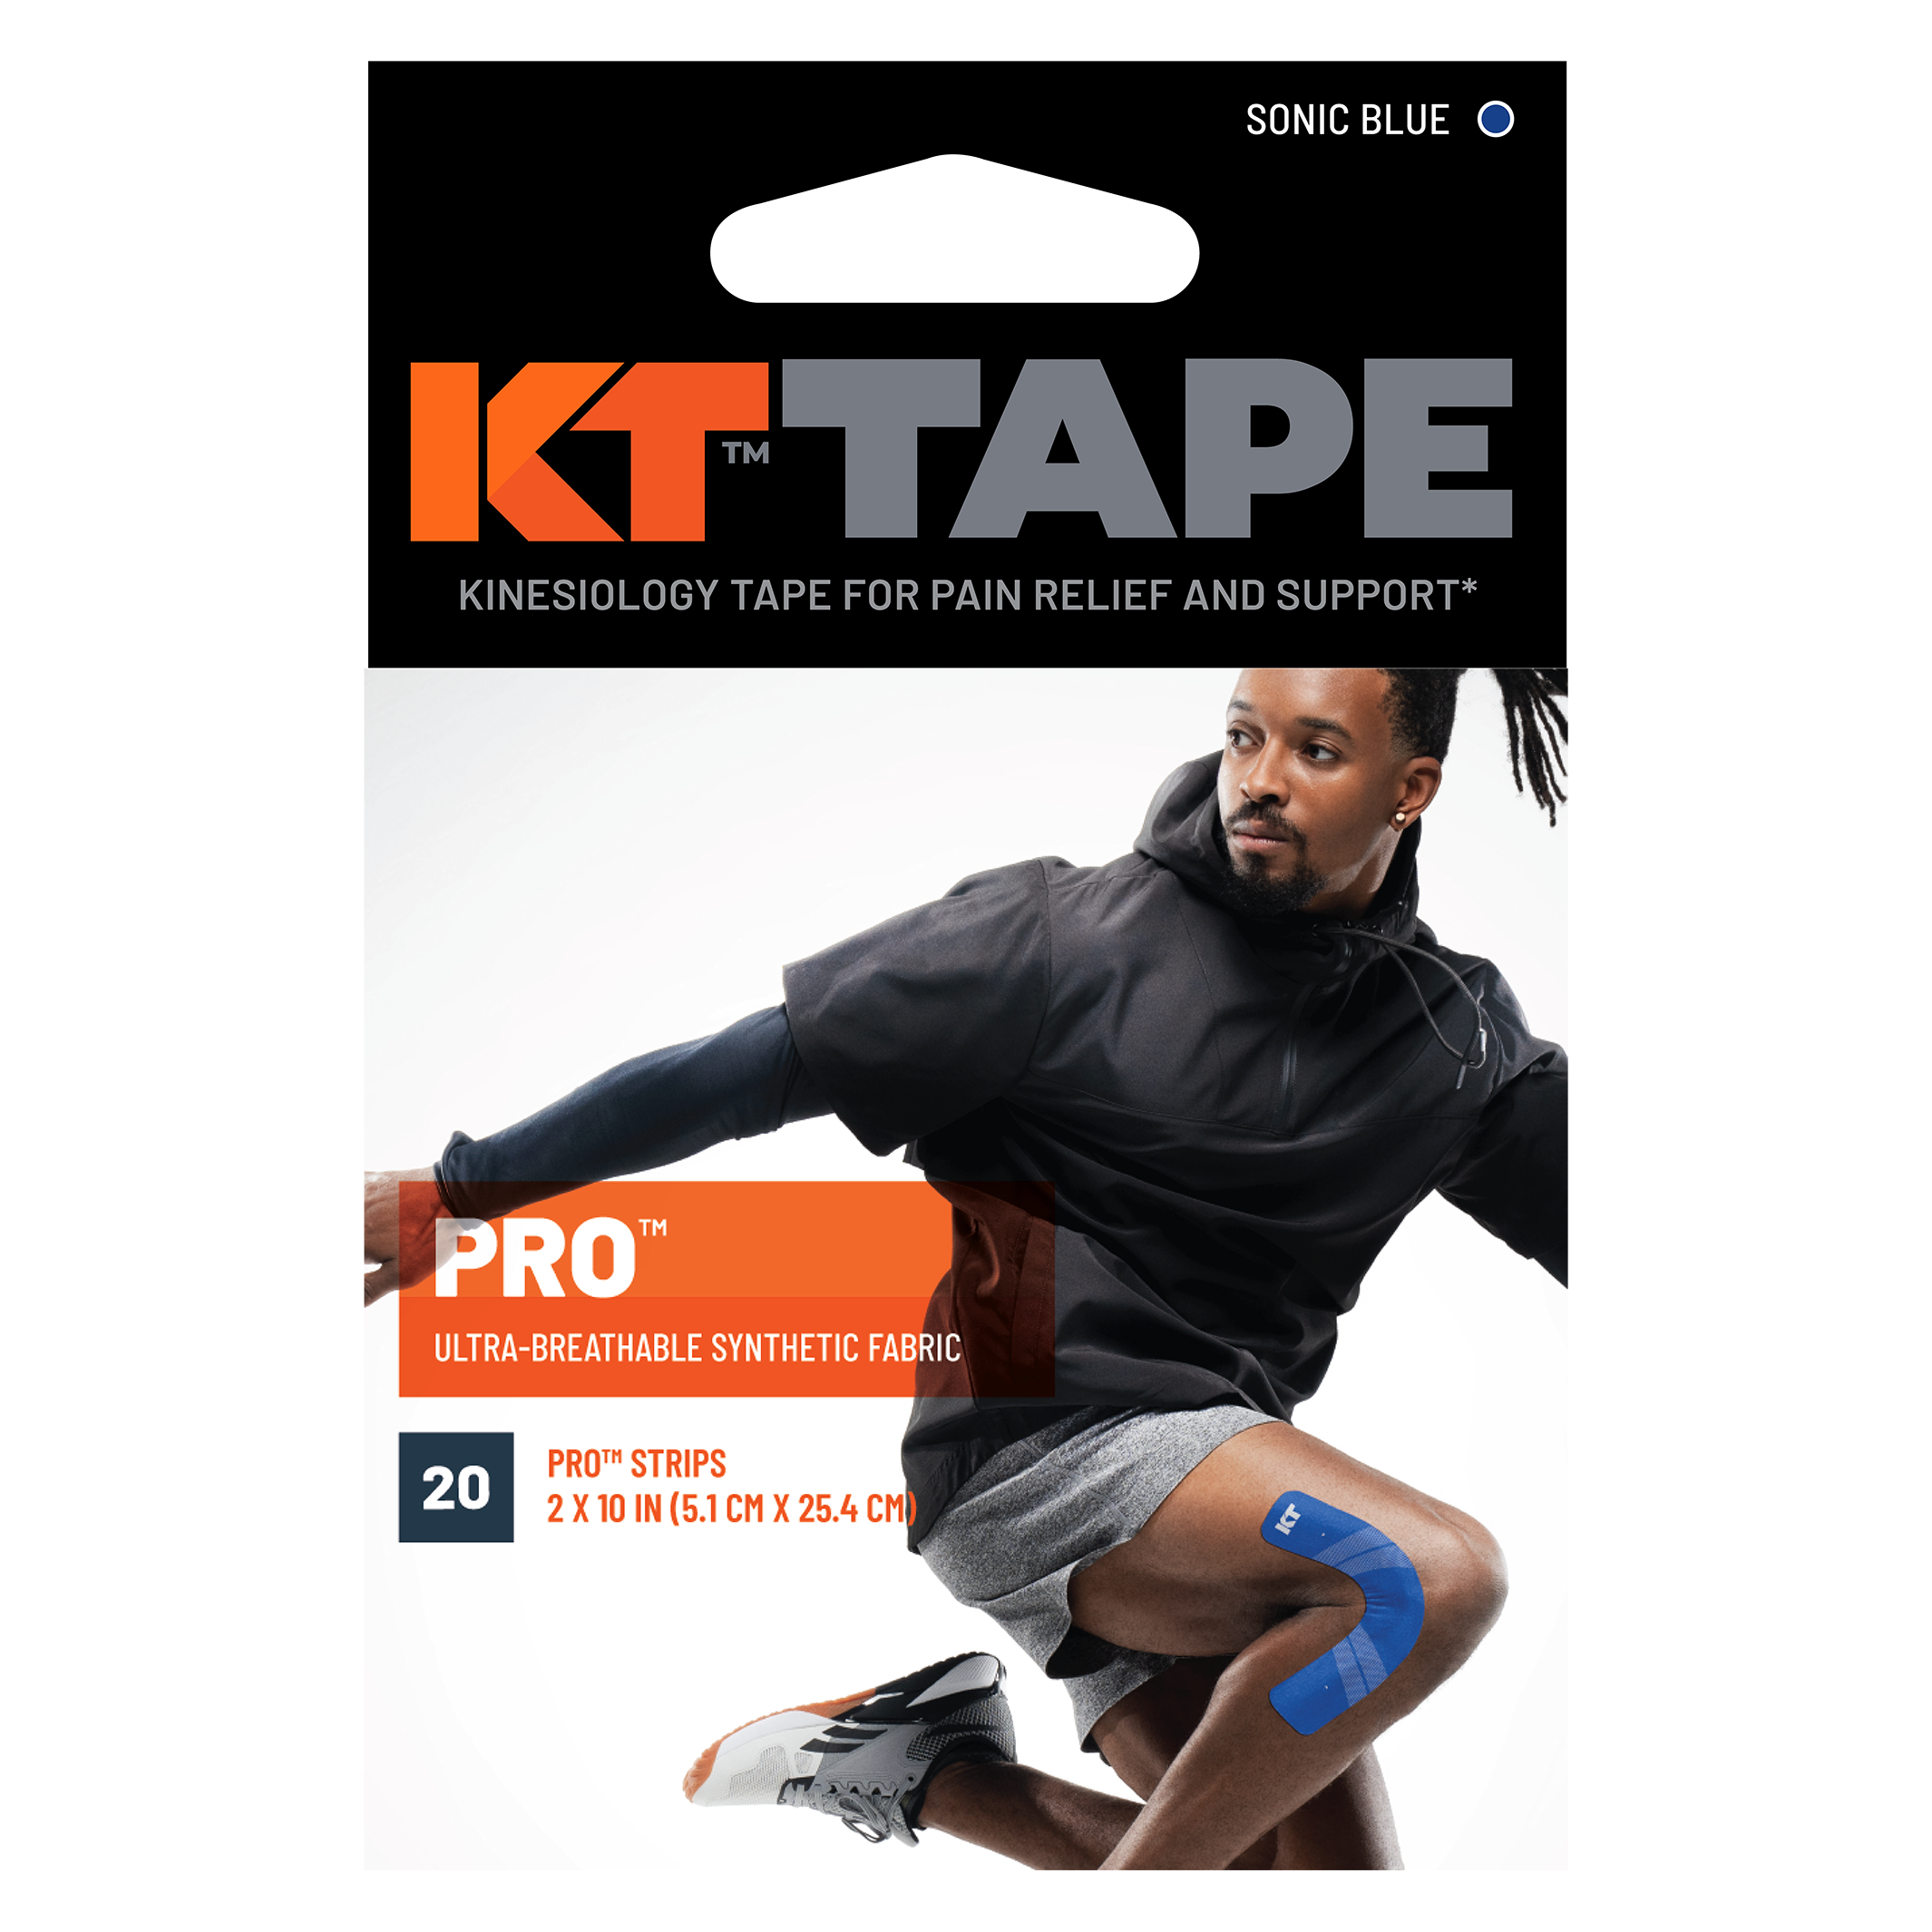 KT Tape Pro packaging#color_sonic-blue